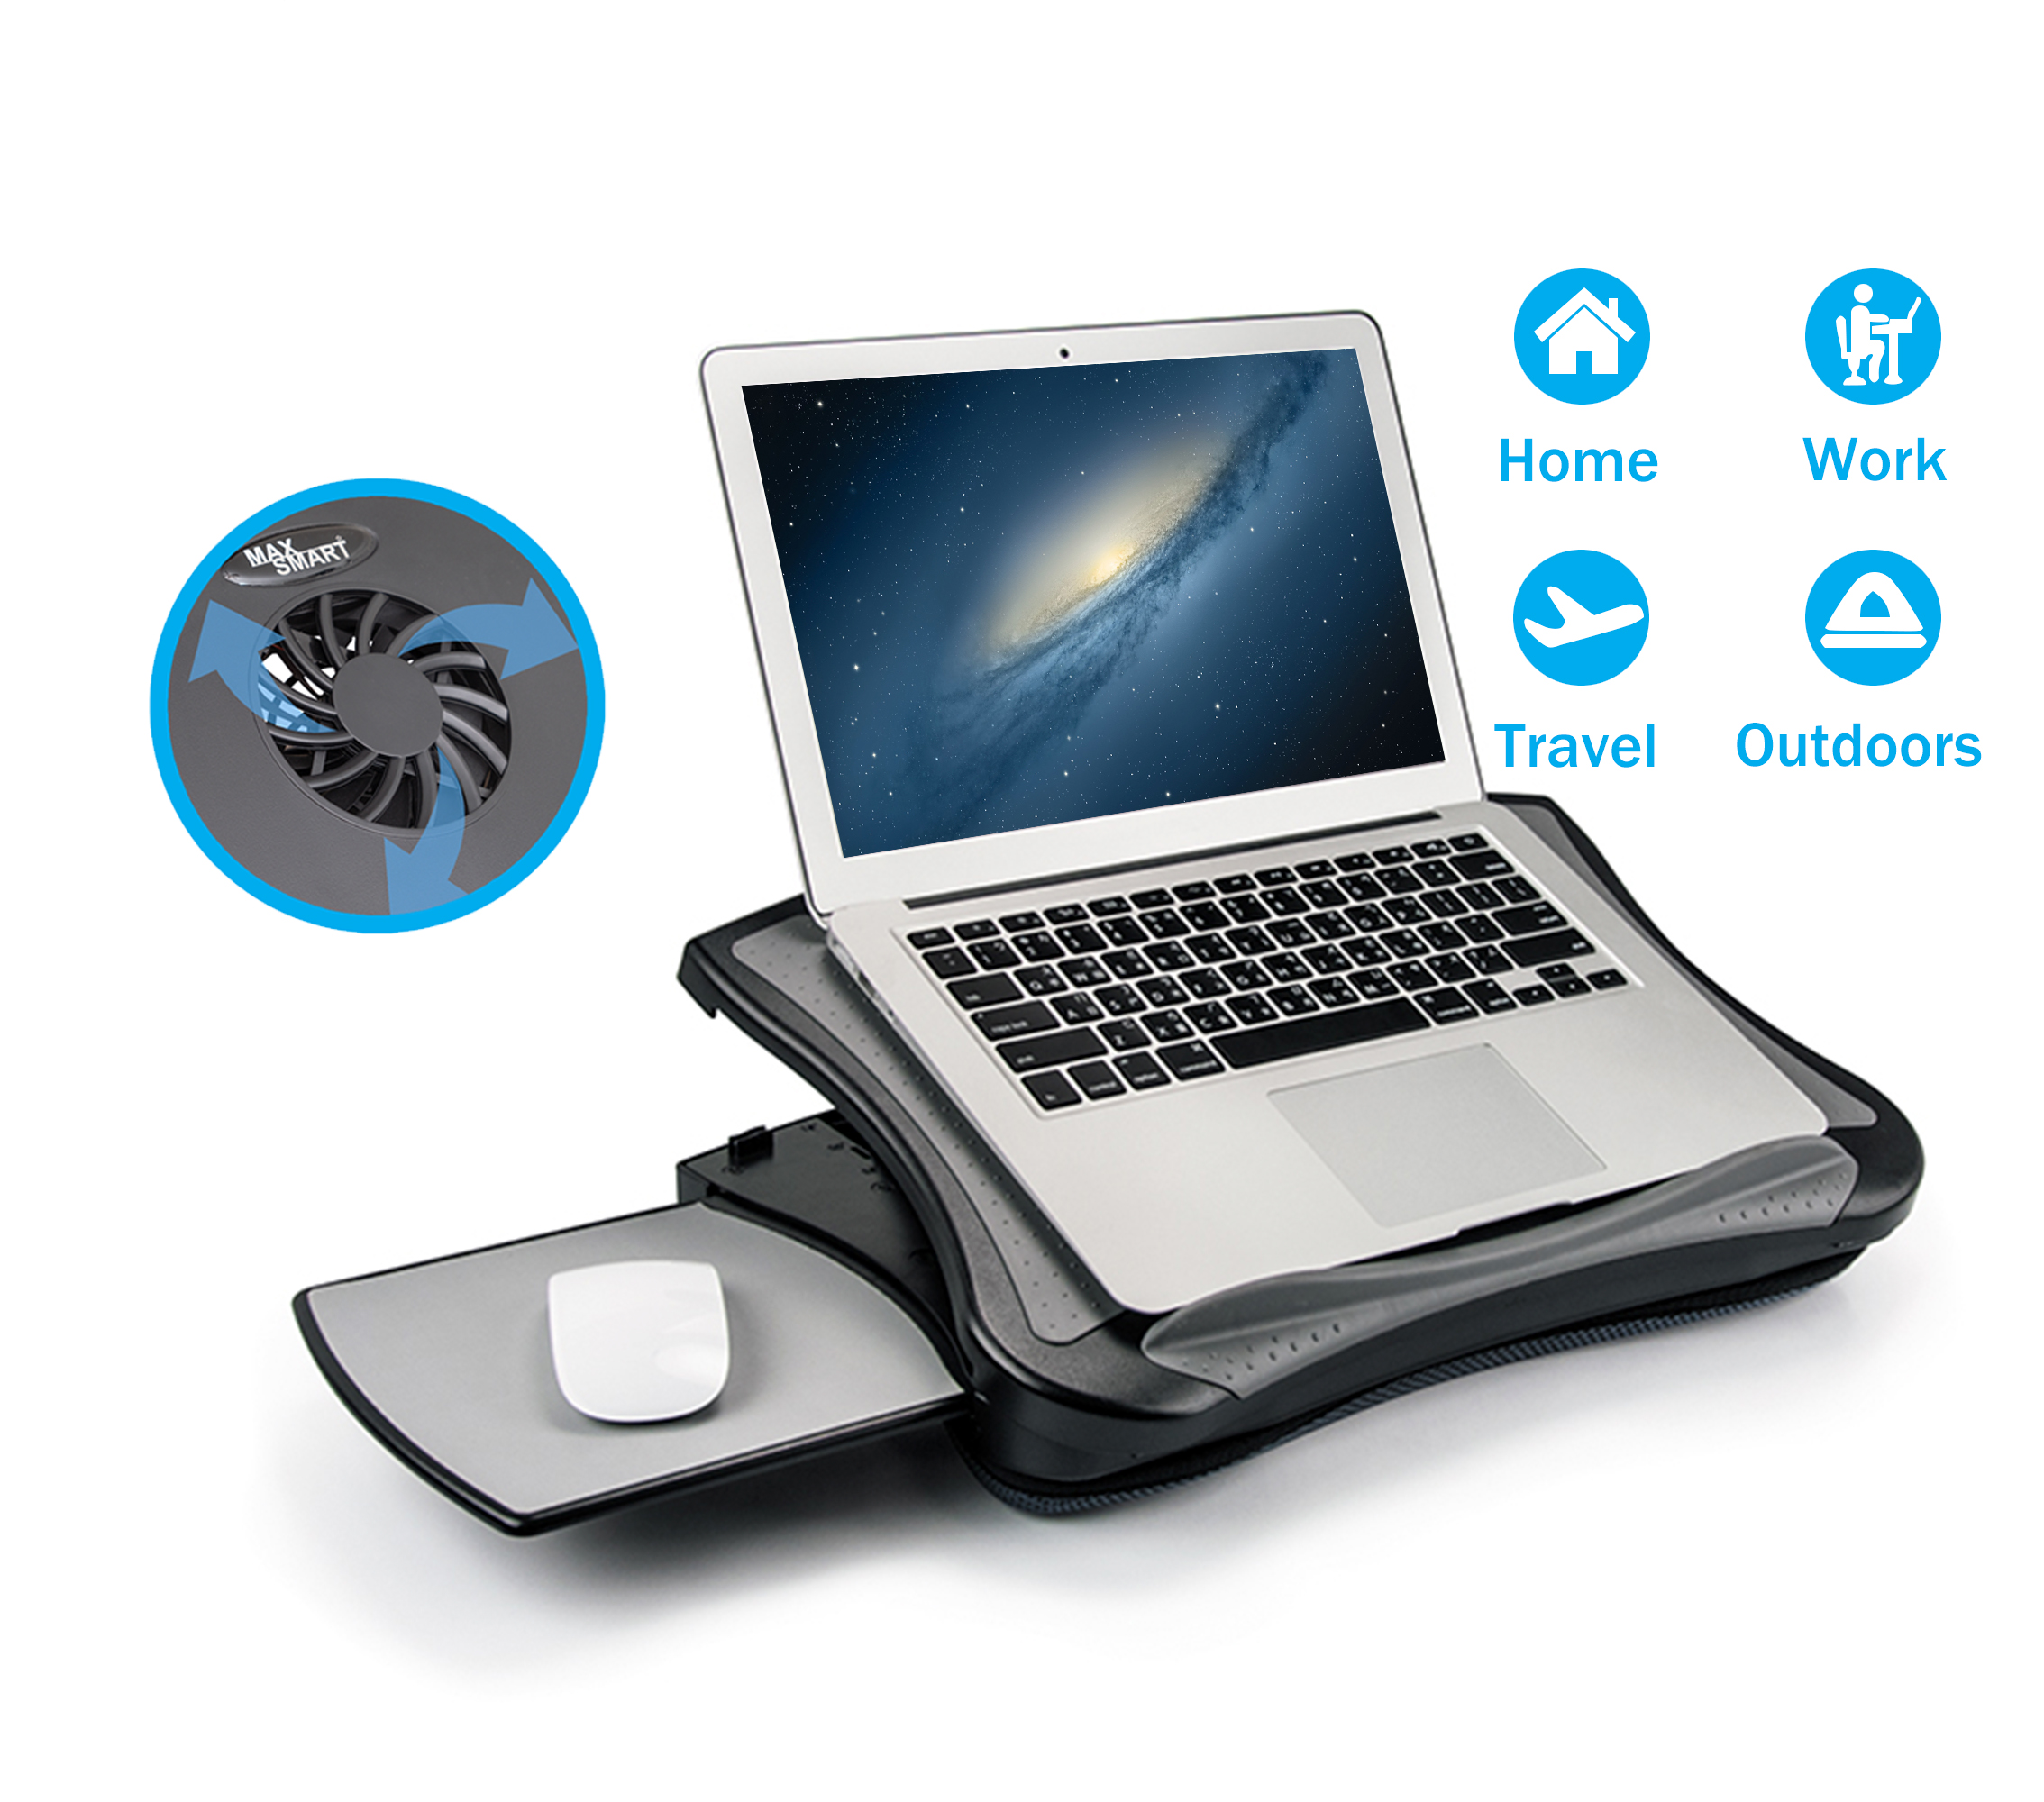 MAX SMART Laptop Lap Desk with Adjustable Angles, Detachable Mouse Pad, USB Fan, and Cushion - image 1 of 7